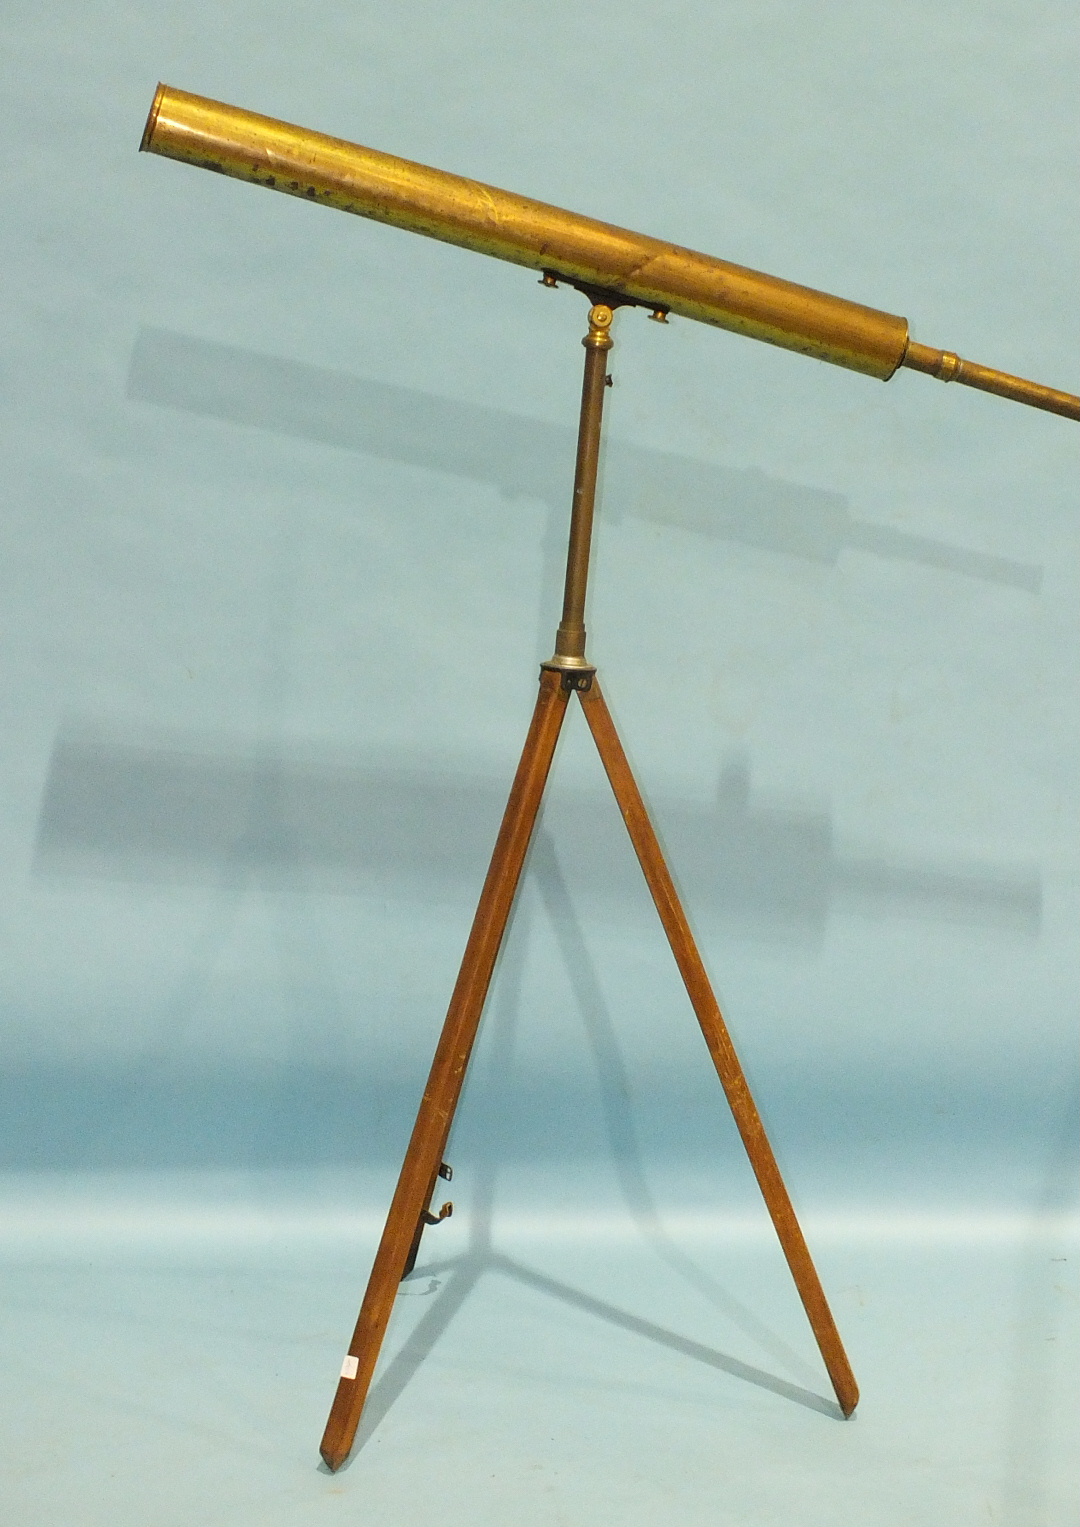 Aitchison & Co, 428 Strand & Branches, a brassed 3" single-draw telescope, 133cm open, on folding